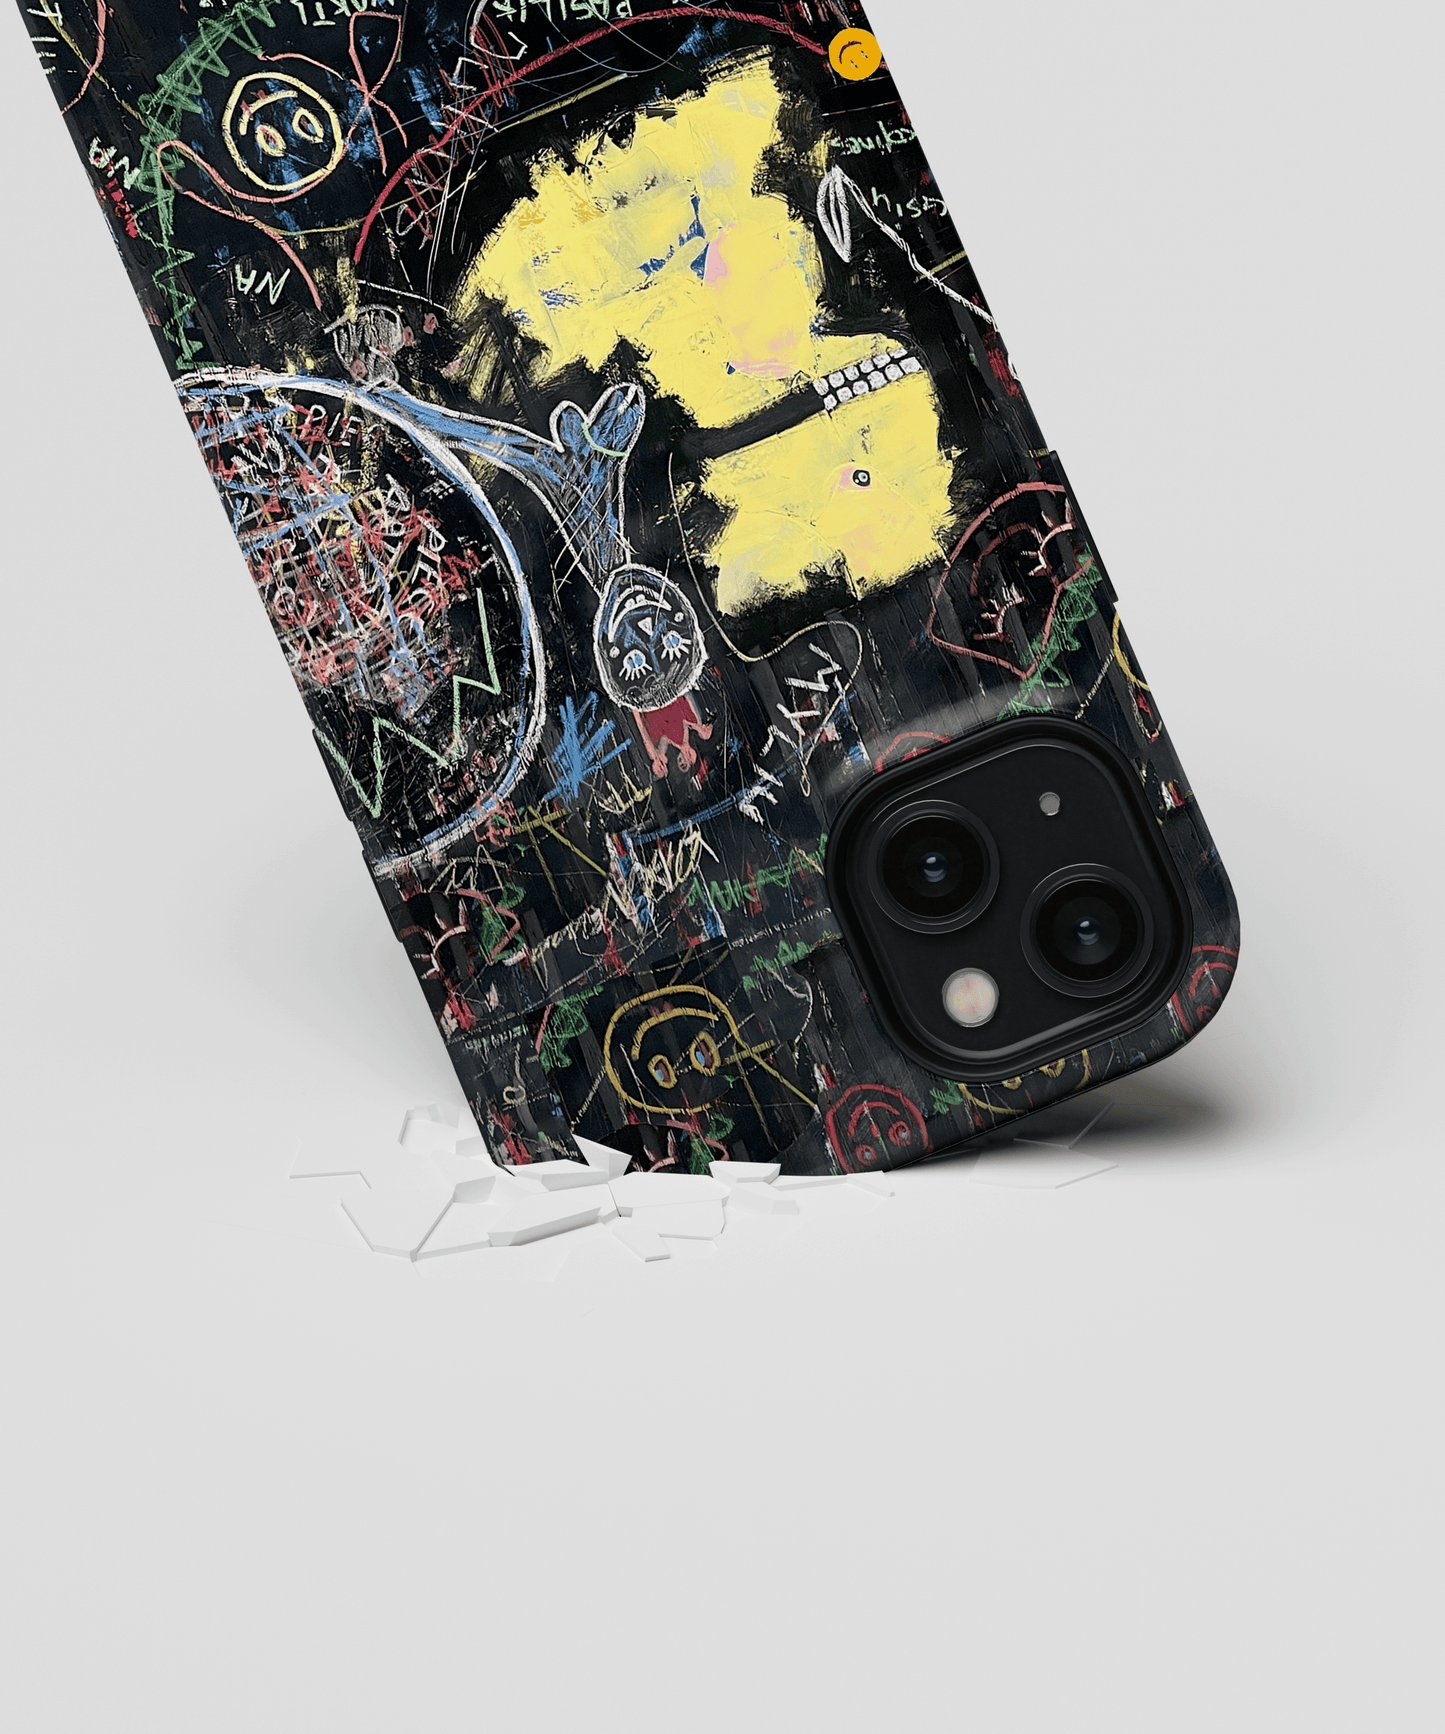 Just keep it - Huawei P30 Pro phone case